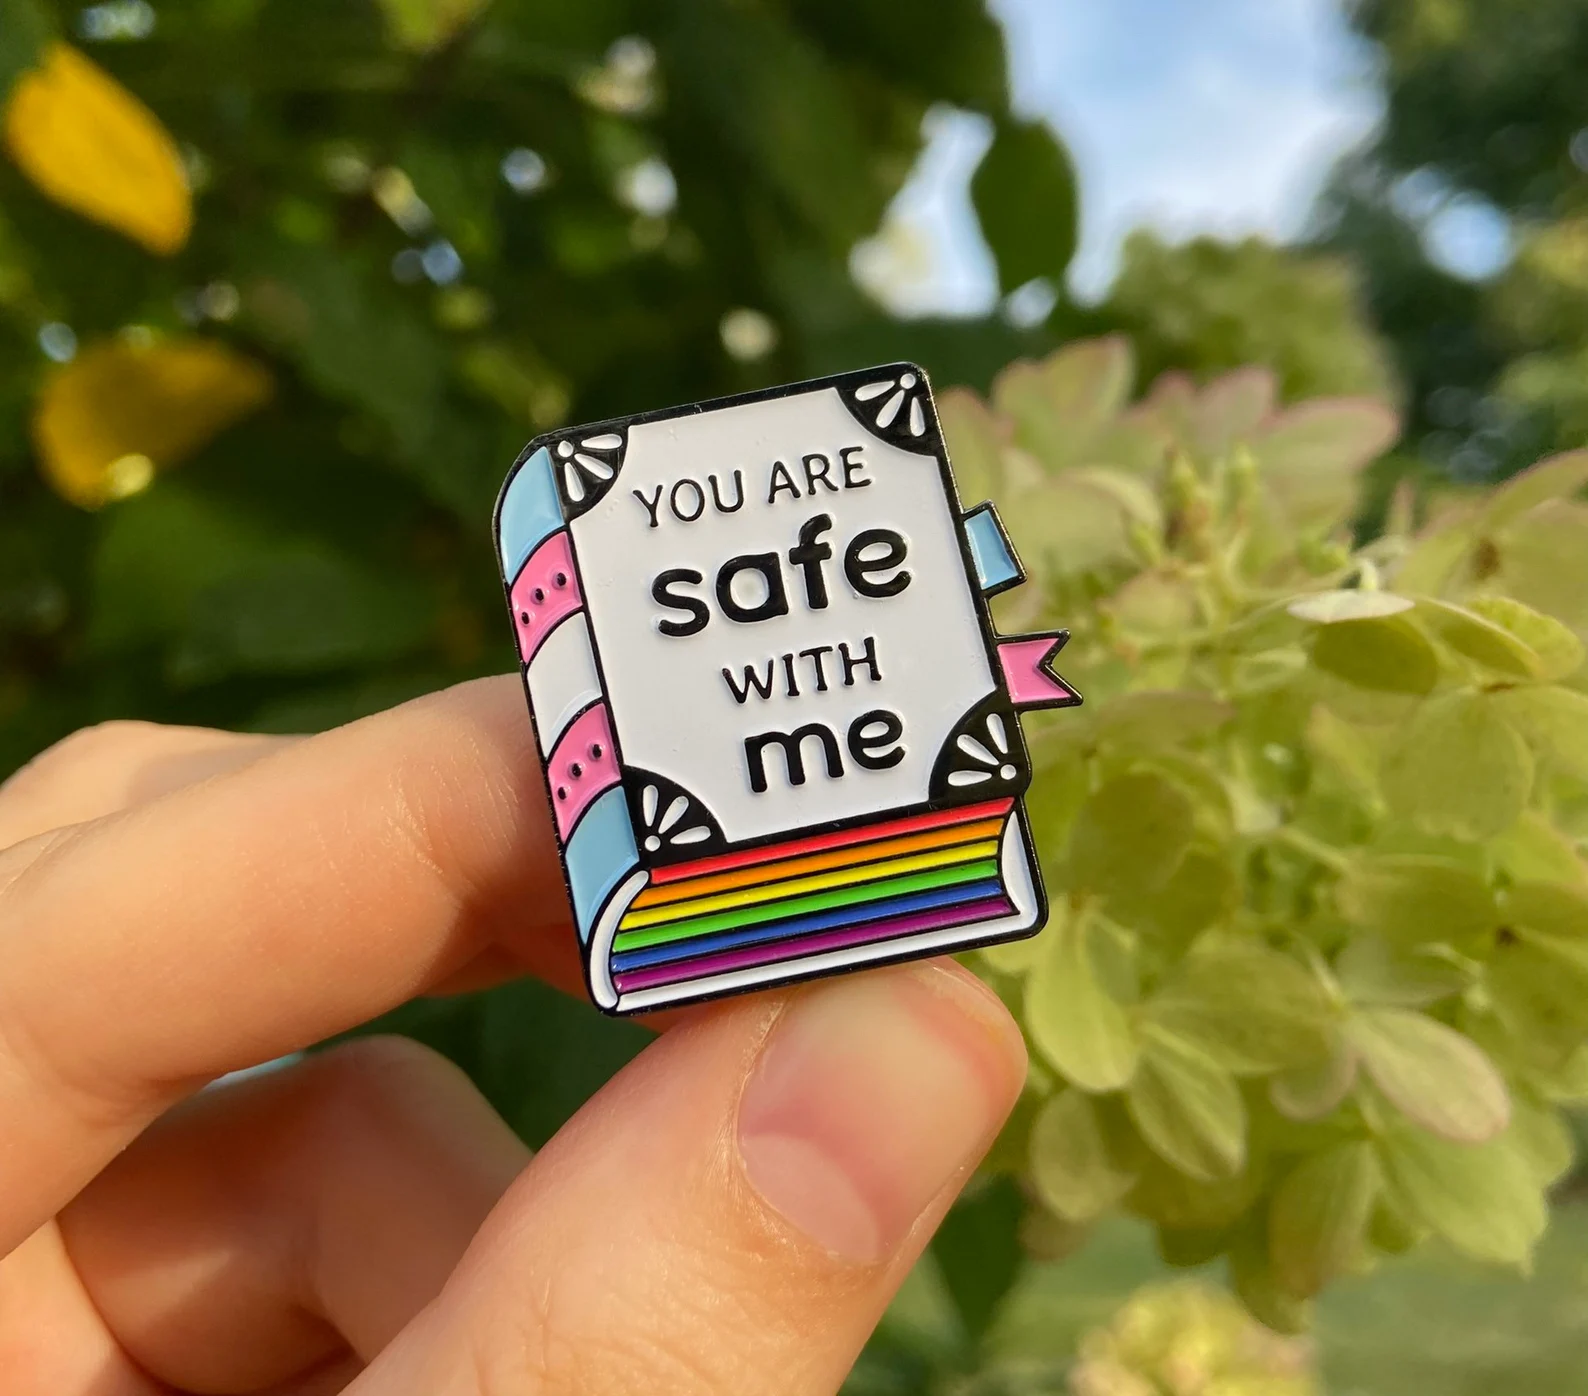 pin in the shape of a book that says "you are safe with me"